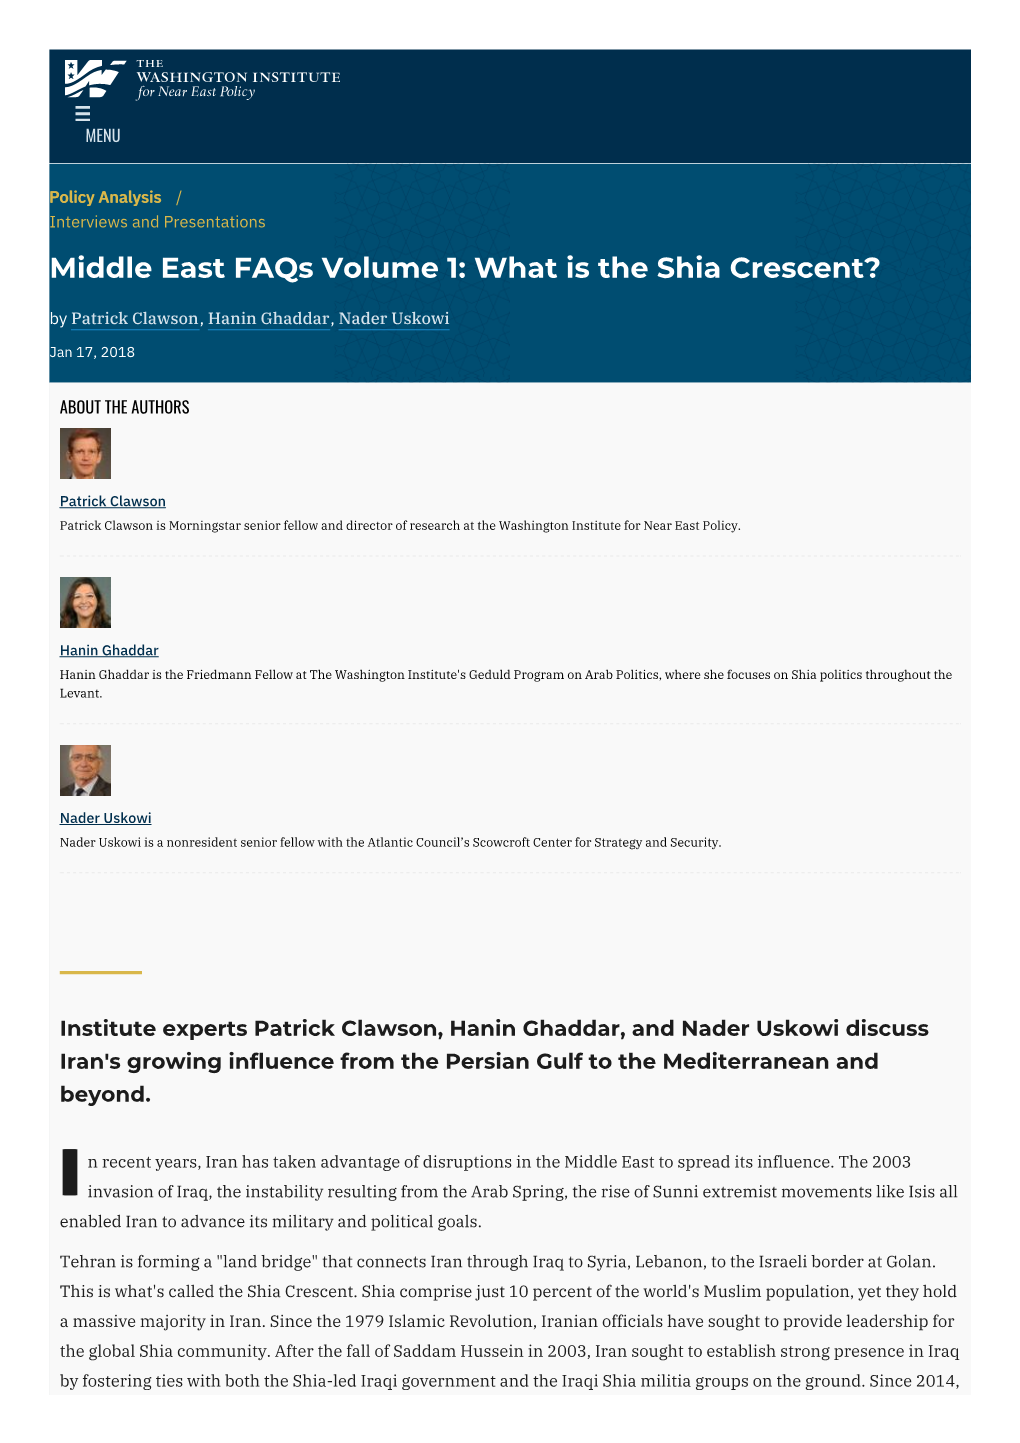 What Is the Shia Crescent? | the Washington Institute